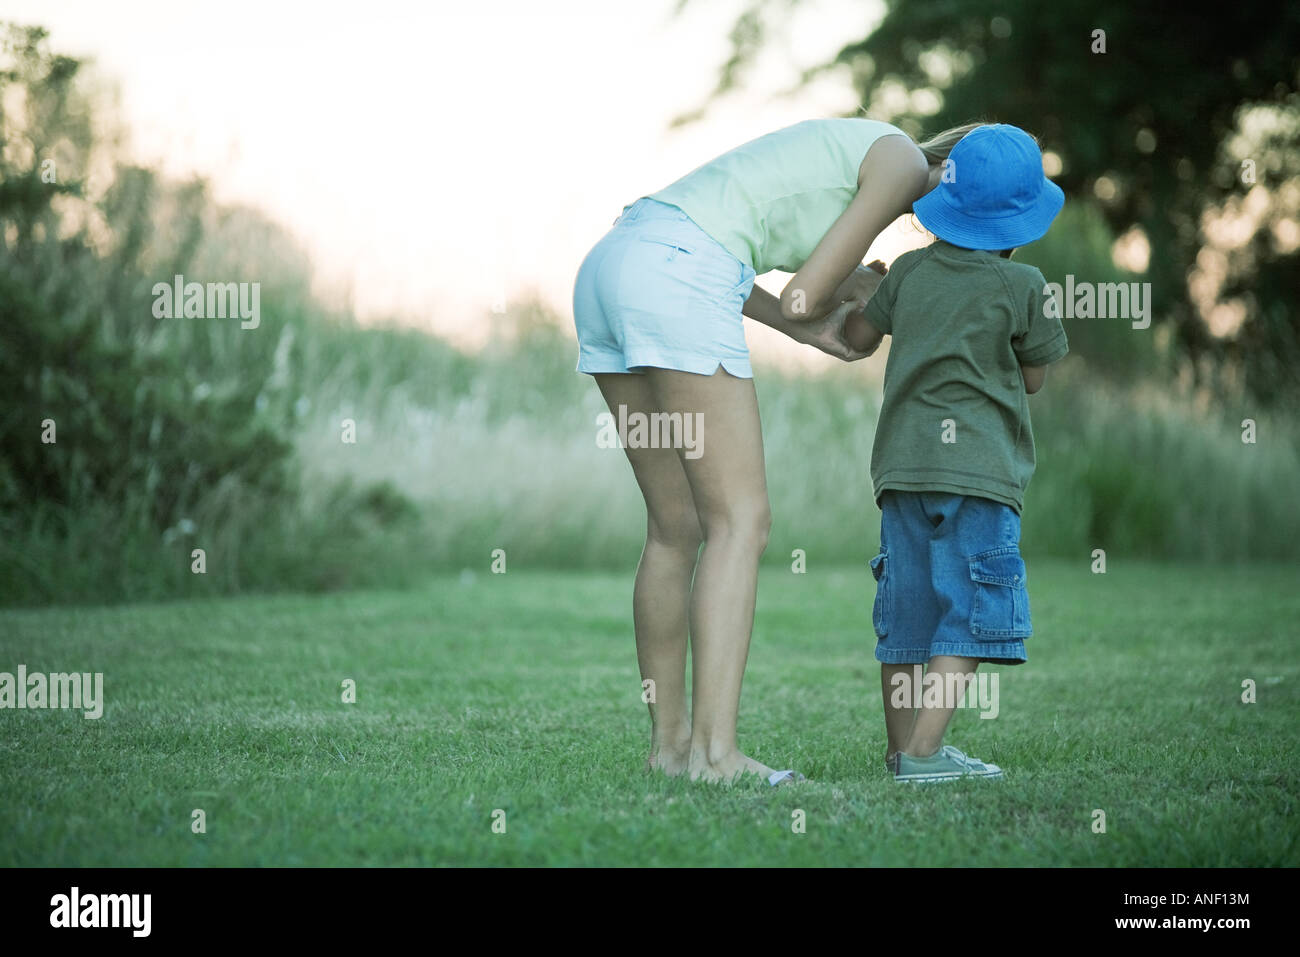 Mother and son standing on lawn, woman bending over to talk to boy Stock Photo